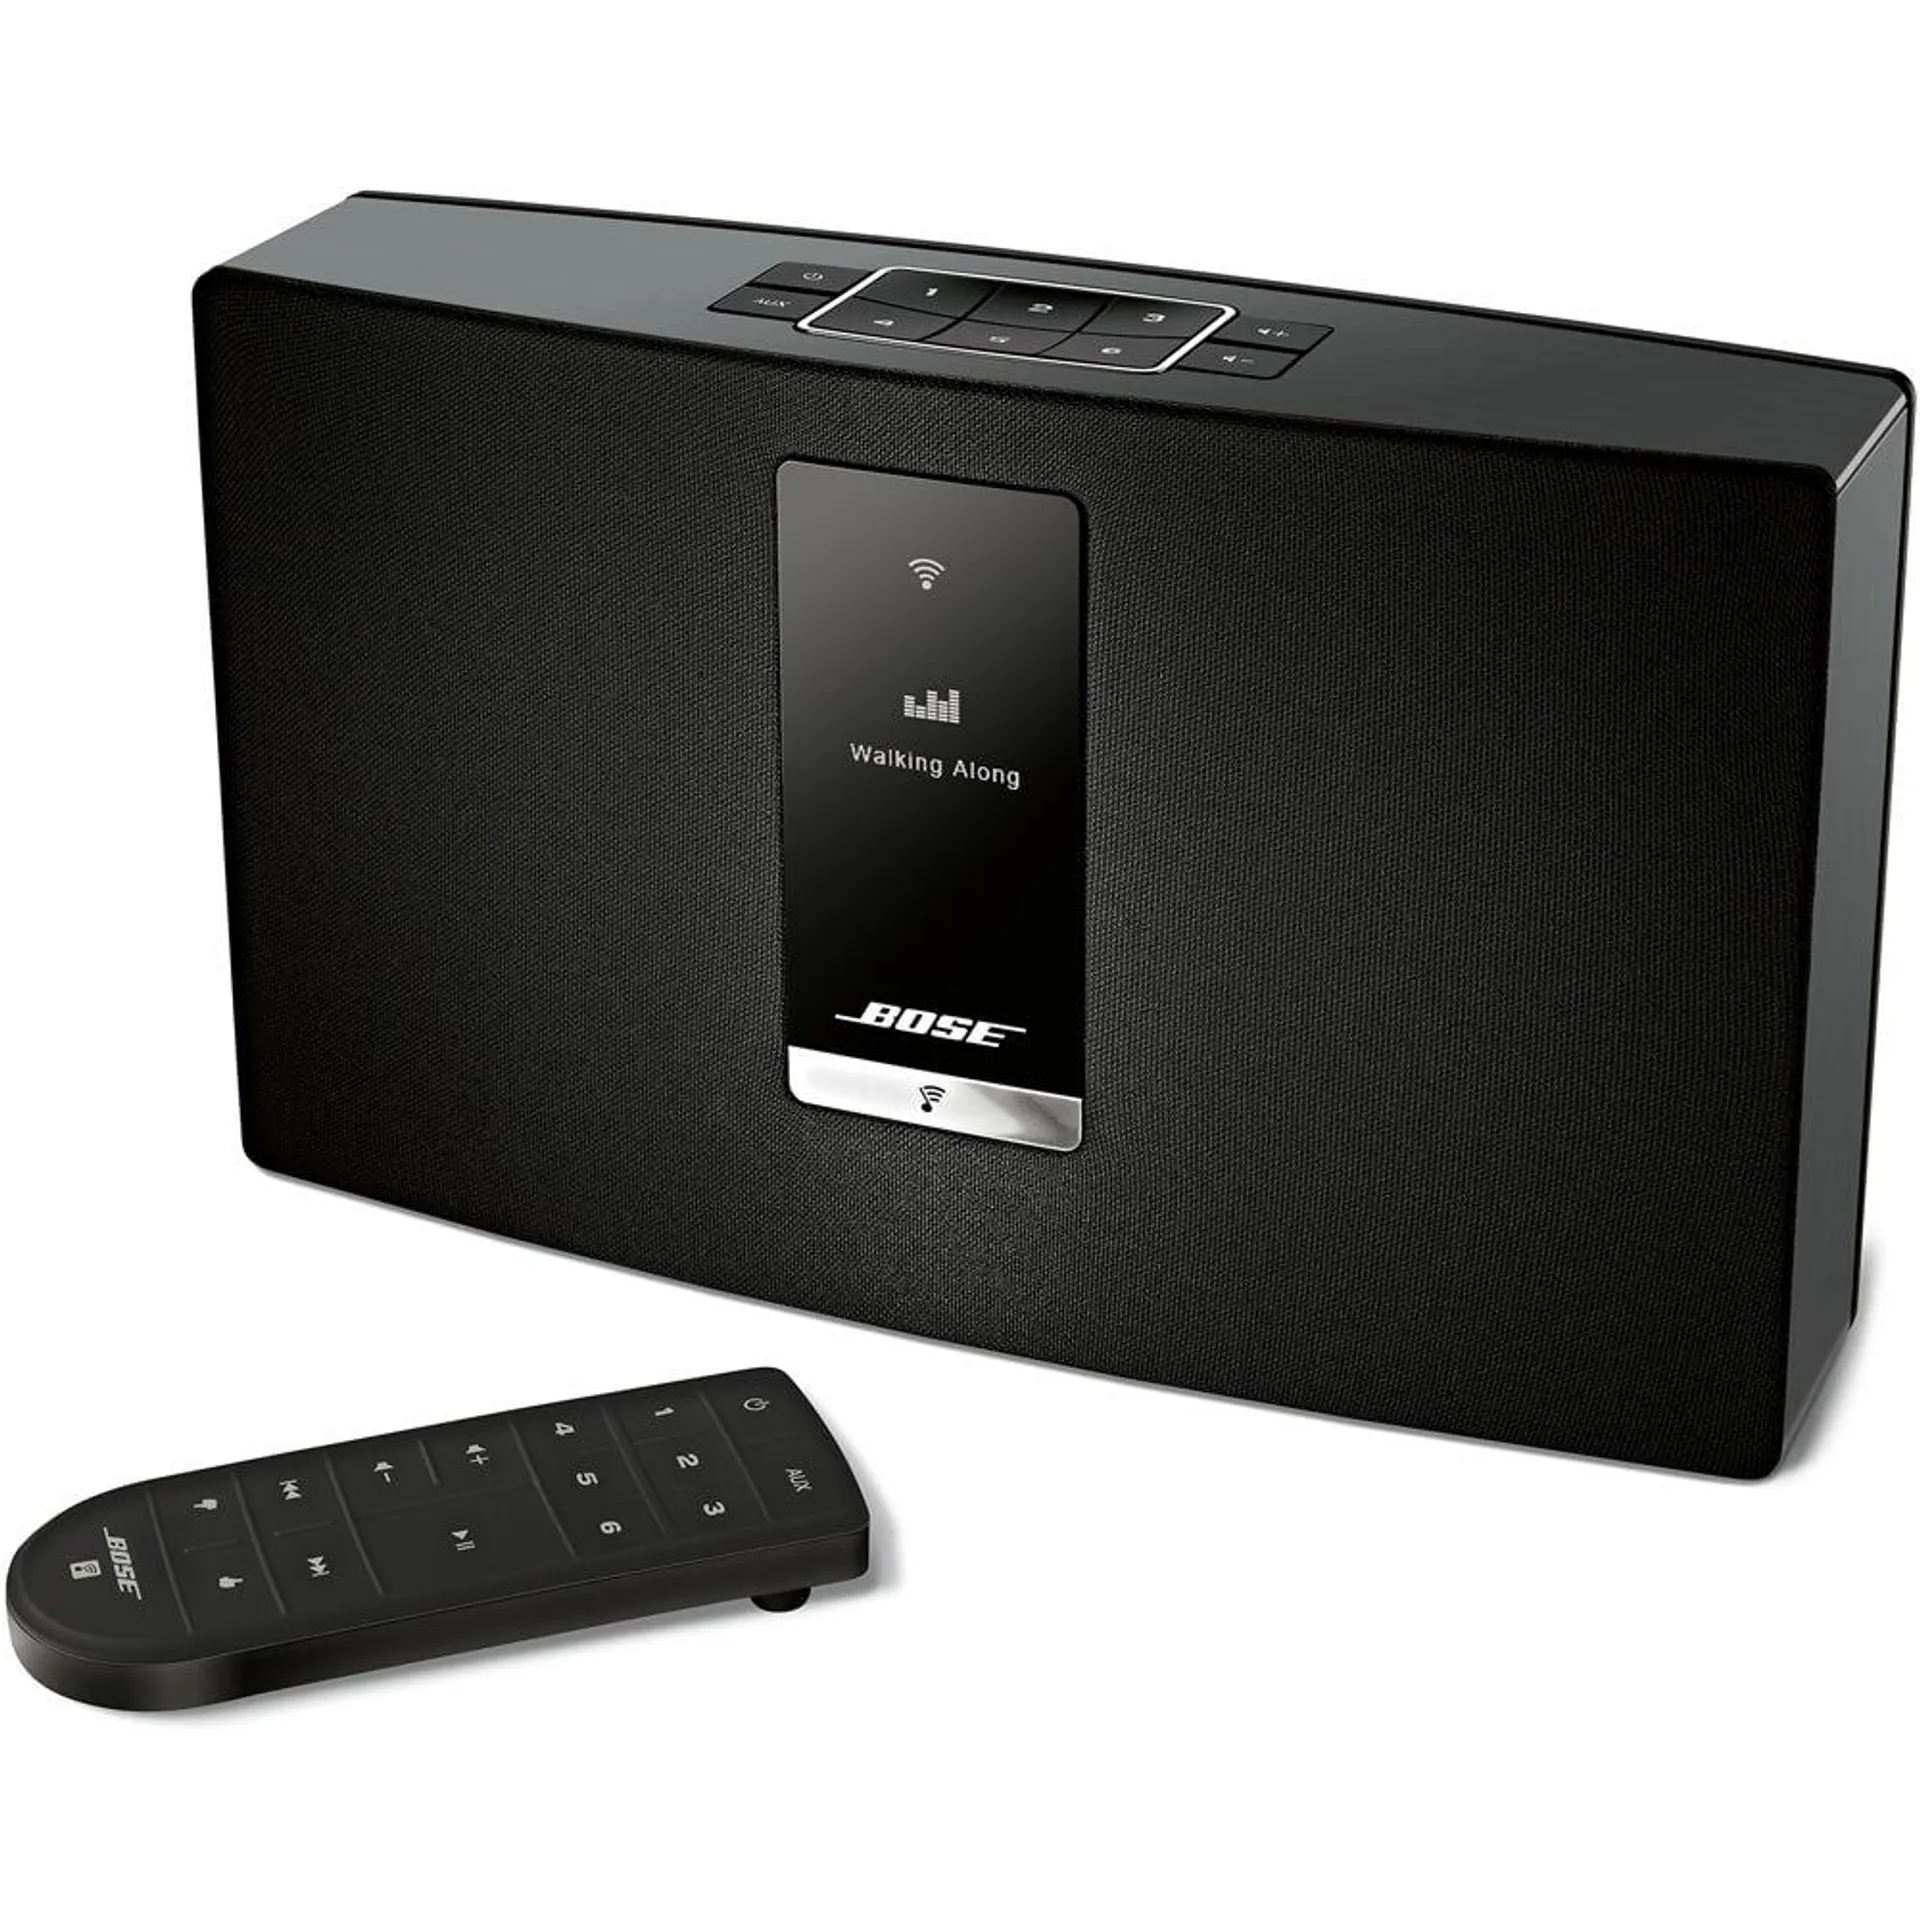 SoundTouch Portable Series II Wi-Fi® music system - Black - OPEN BOX